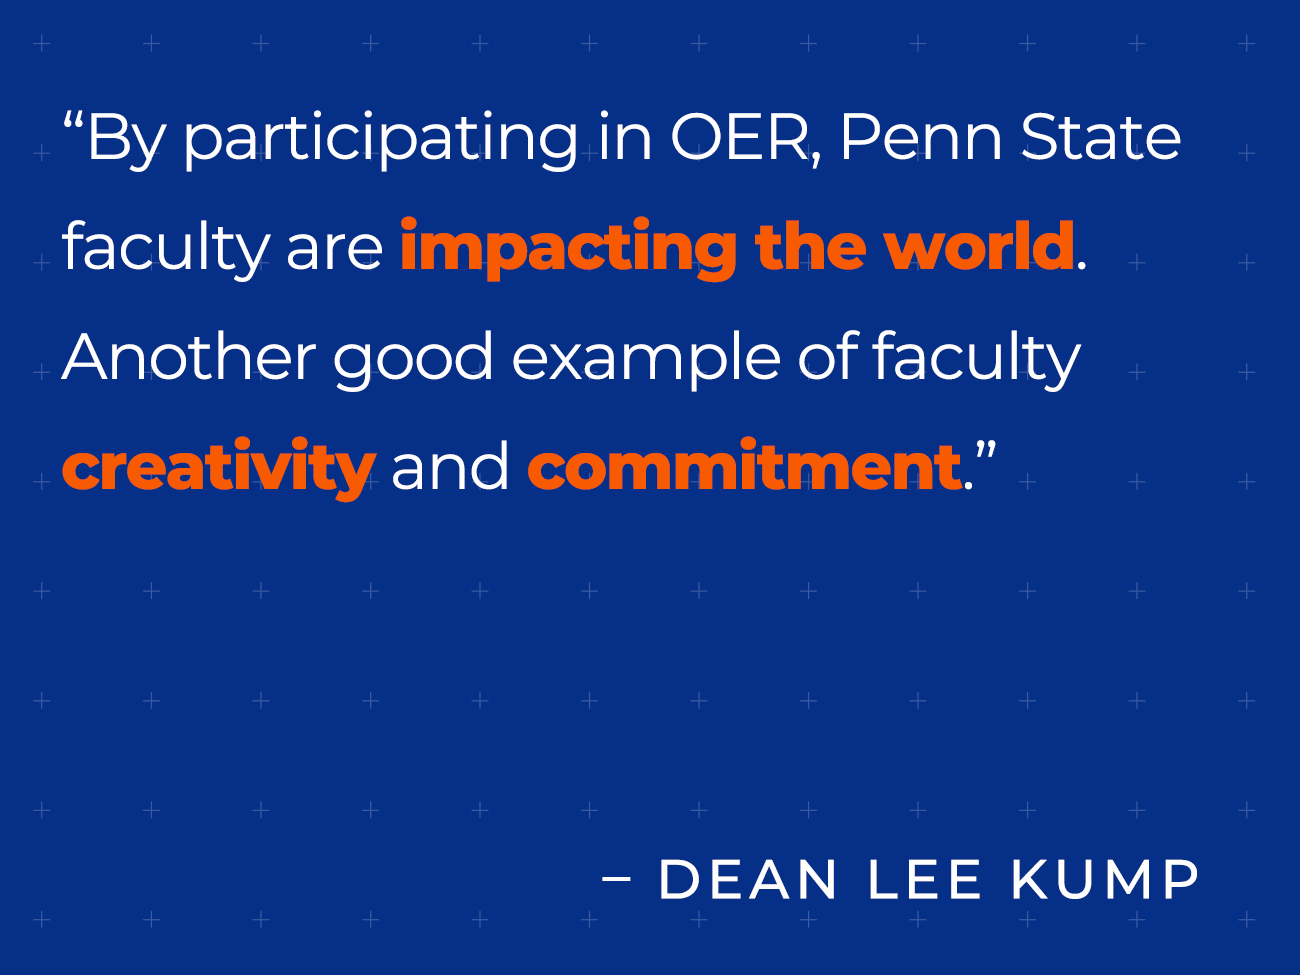 By participating in OER, Penn State faculty are impacting the world. Another good example of faculty creativity and commitment. – Dean Kump